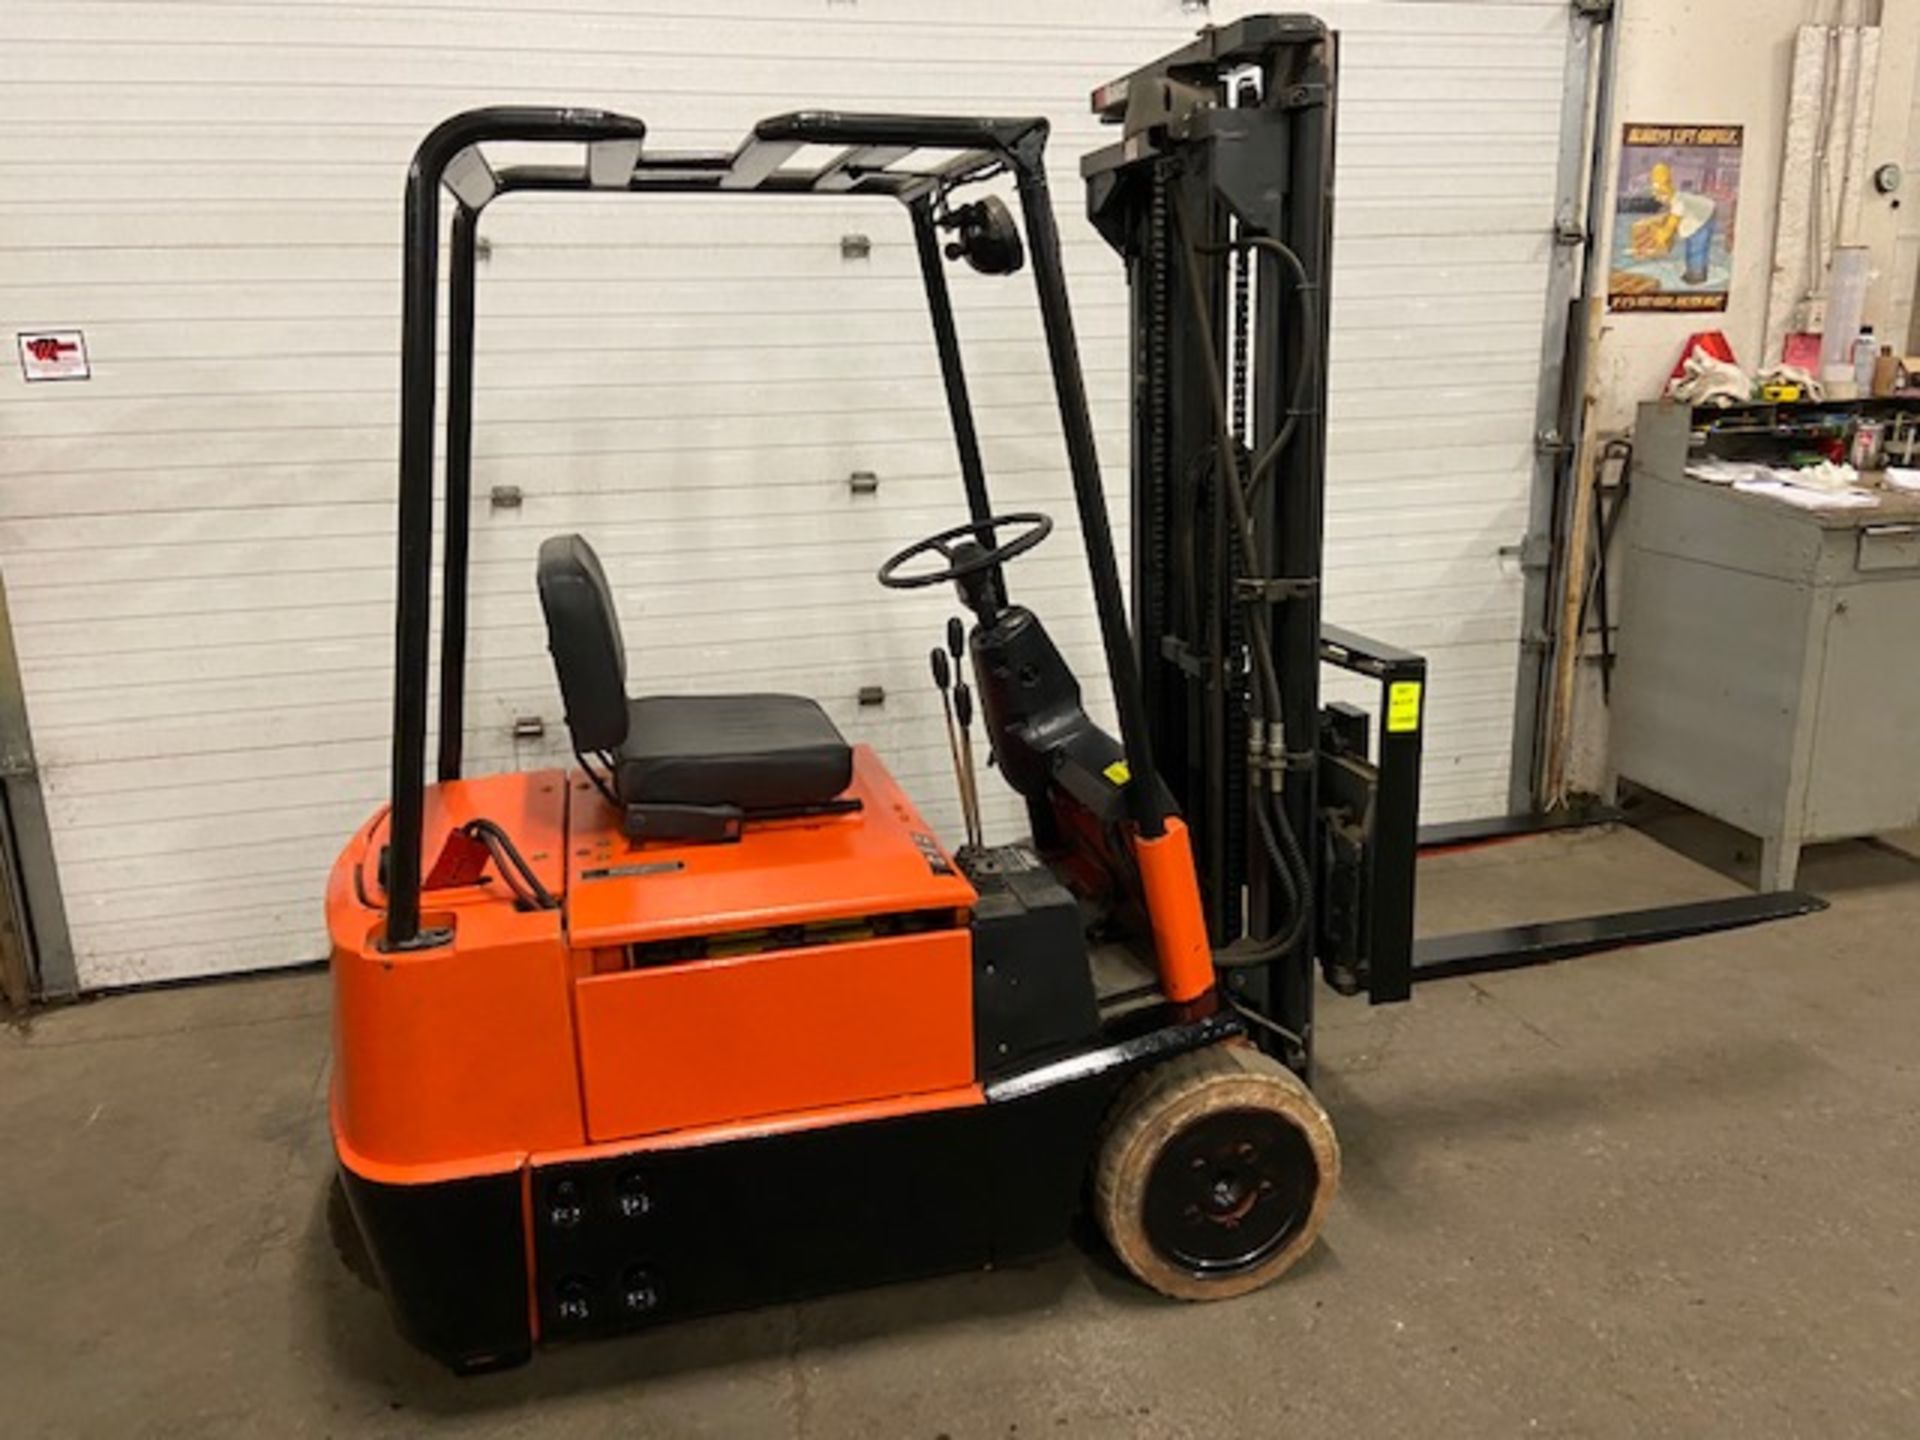 FREE CUSTOMS - Baker 3-wheel 3000lbs Capacity Forklift with 3-stage mast - electric with sideshift